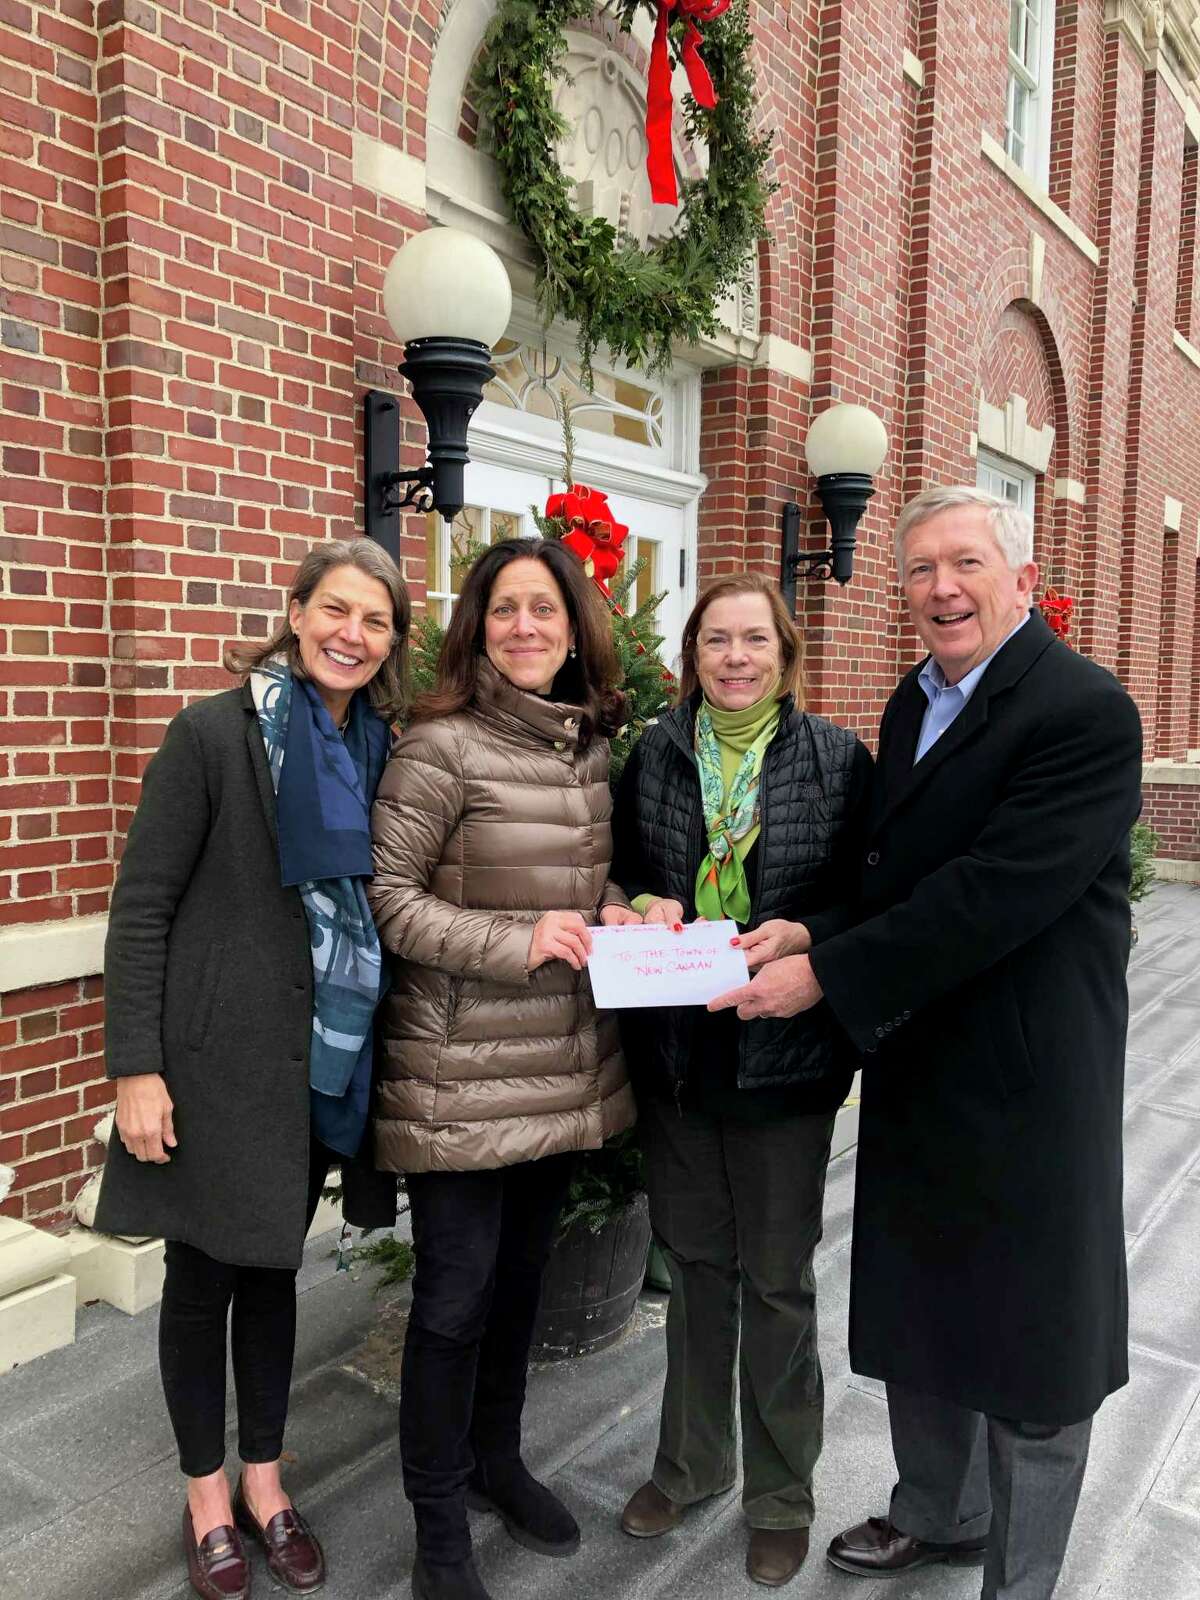 New Canaan Garden Club members recently donated more than $3,000 to the town that was earmarked for one of three organizations: The food pantry, Warm Up Fund or GetAbout. Picutred are: Bethany Zaro, Lauren Bromberg, Anda Hutchins and New Canaan First Selectmen Kevin Moynihan.